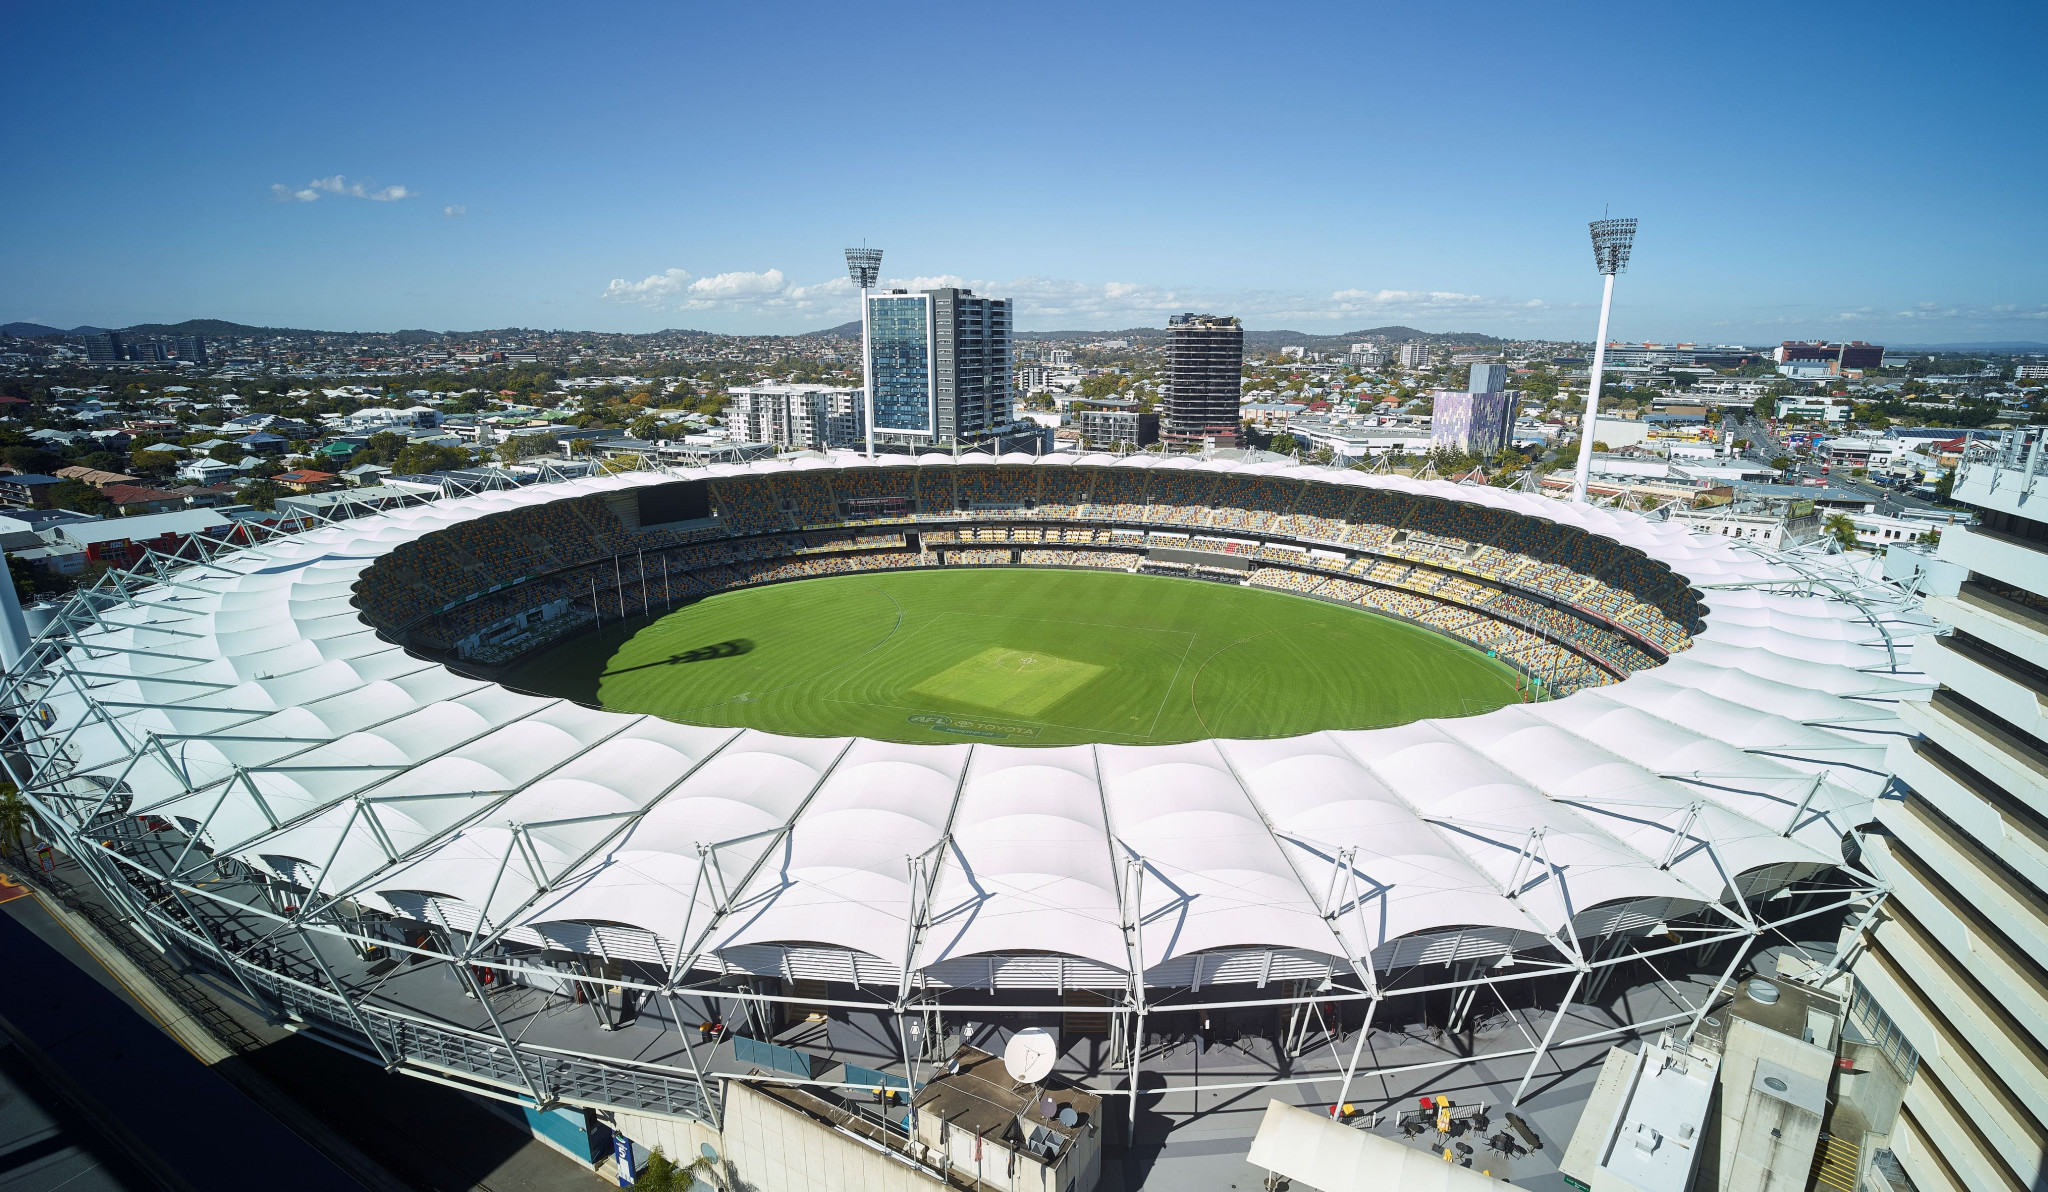 HKS director Andrew Colling believes a timber shell around the Brisbane Cricket Ground would help it stand out against the norm ©Getty Images